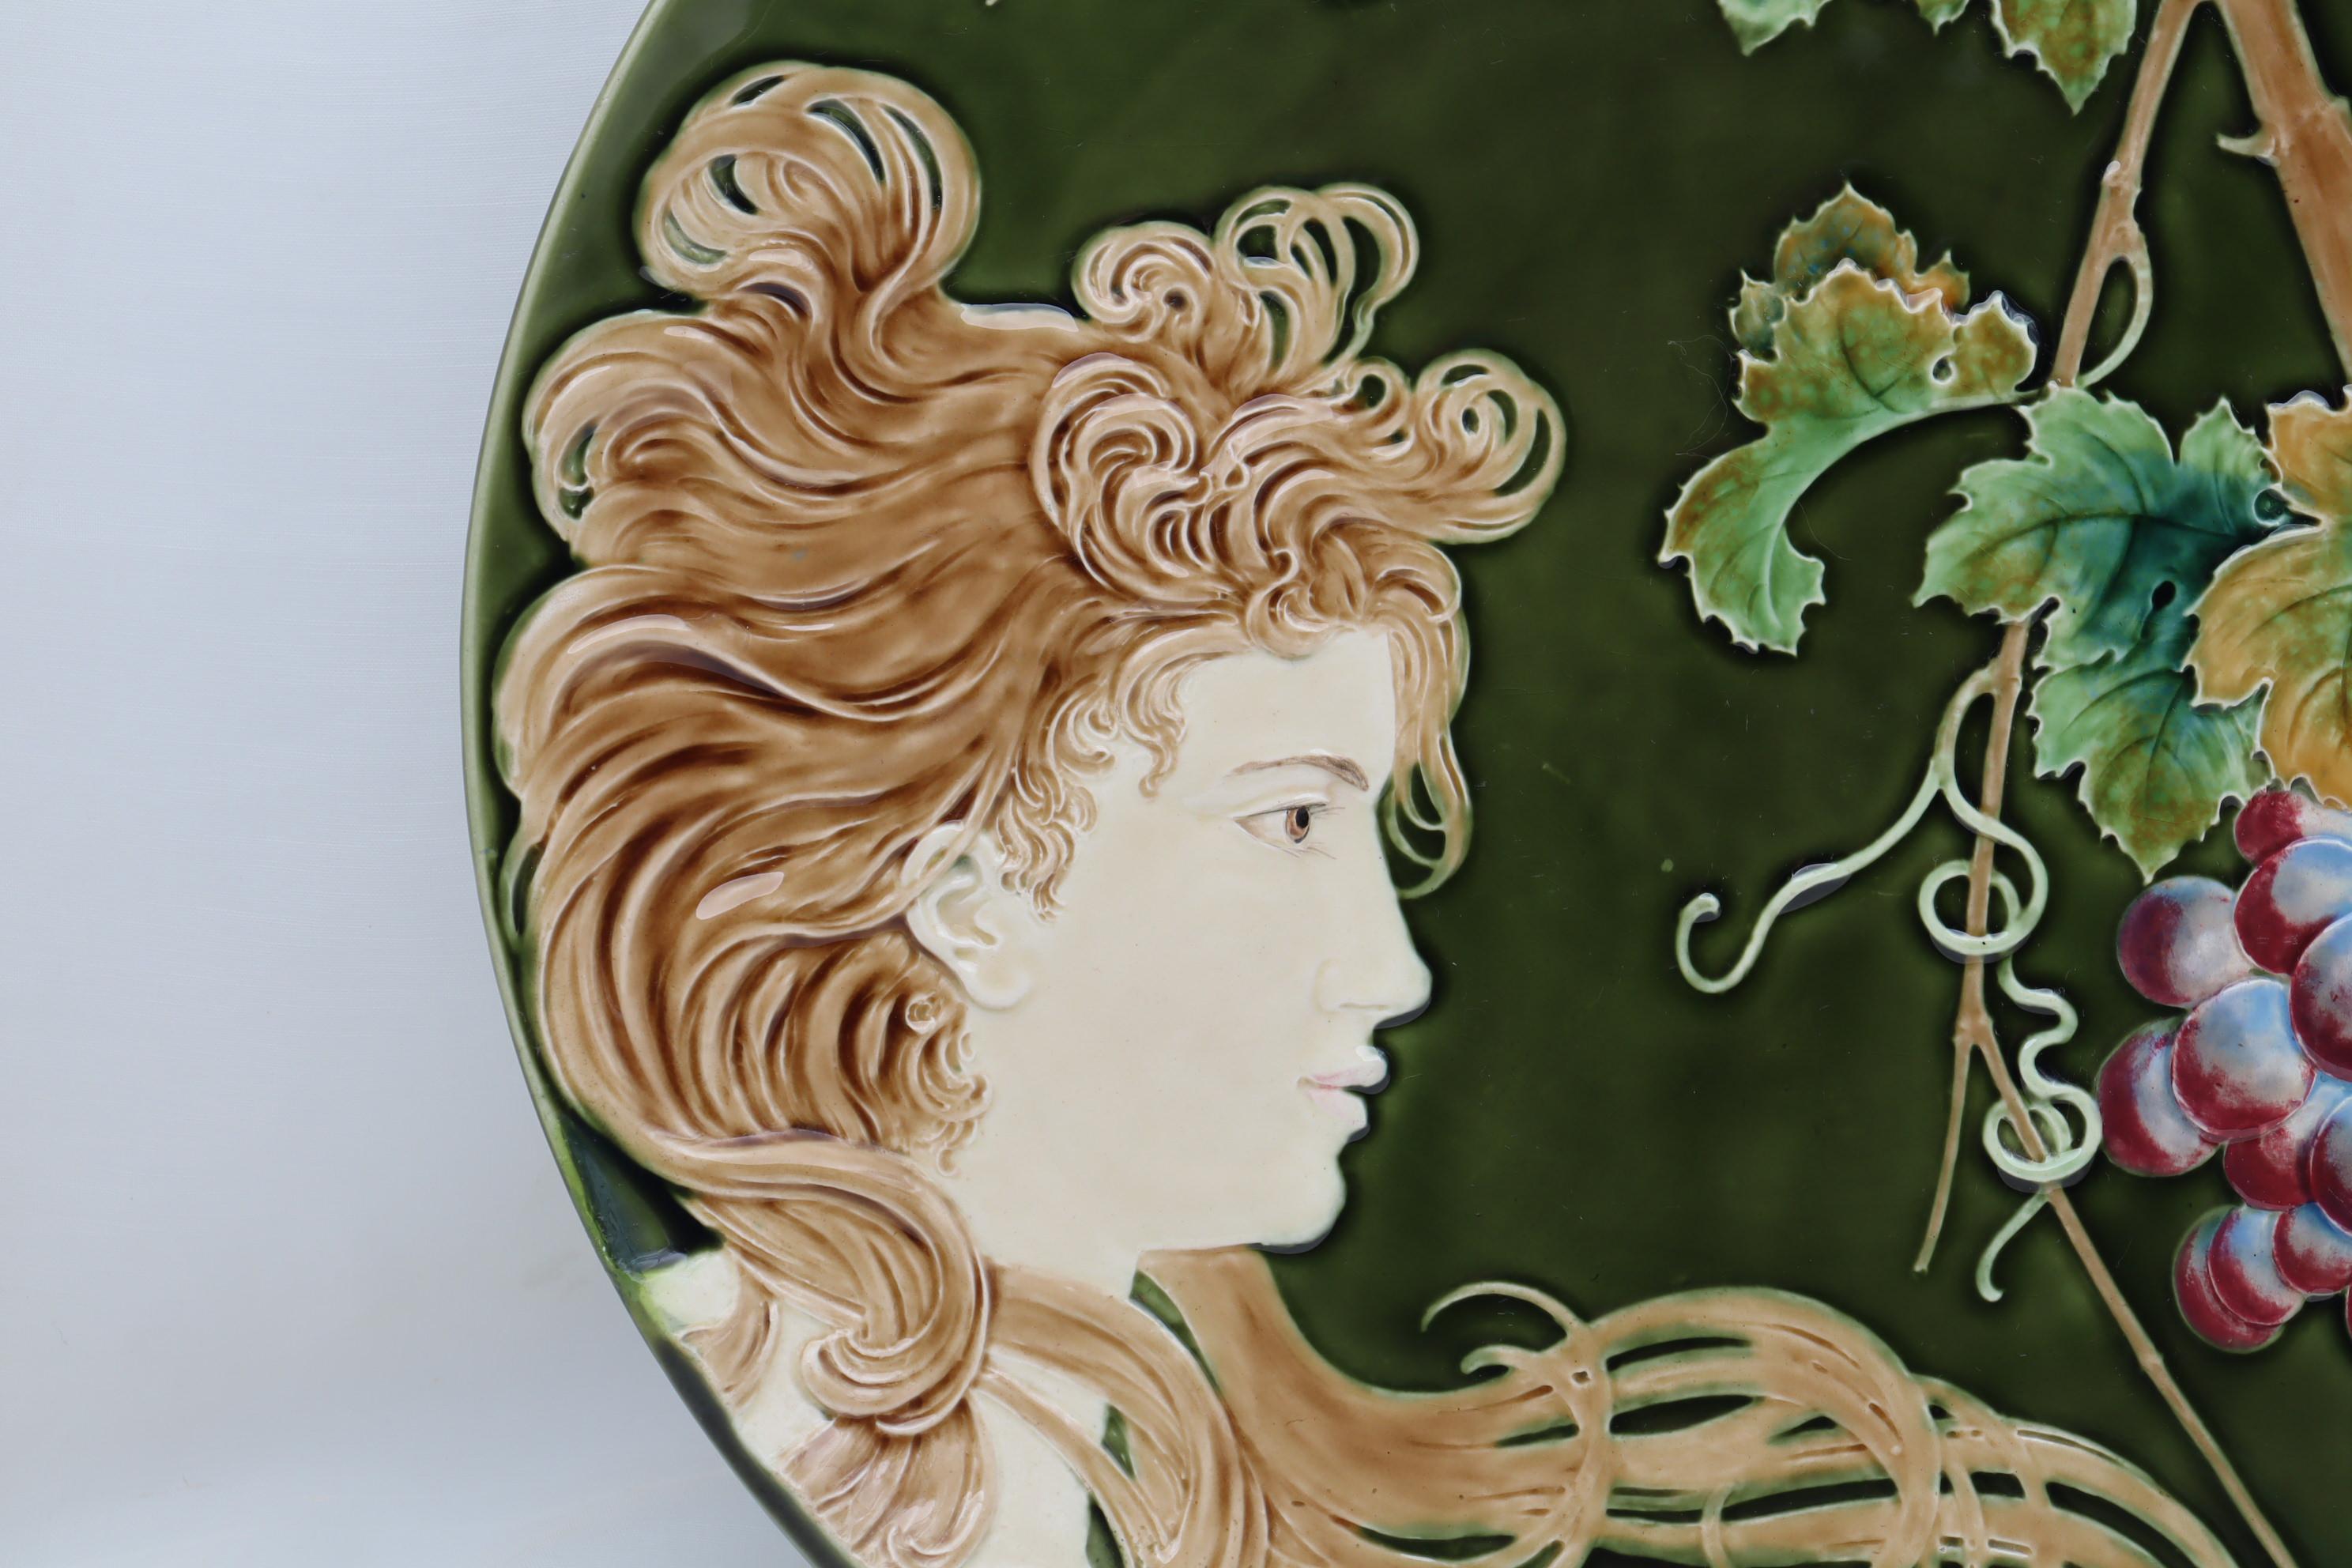 This large wall plaque is decorated with Majolica glazes to enhance the typical Art Nouveau pattern of the young girl and her long flowing tresses. The raised moulded design has been coloured by hand, and then using the sgraffito technique, small